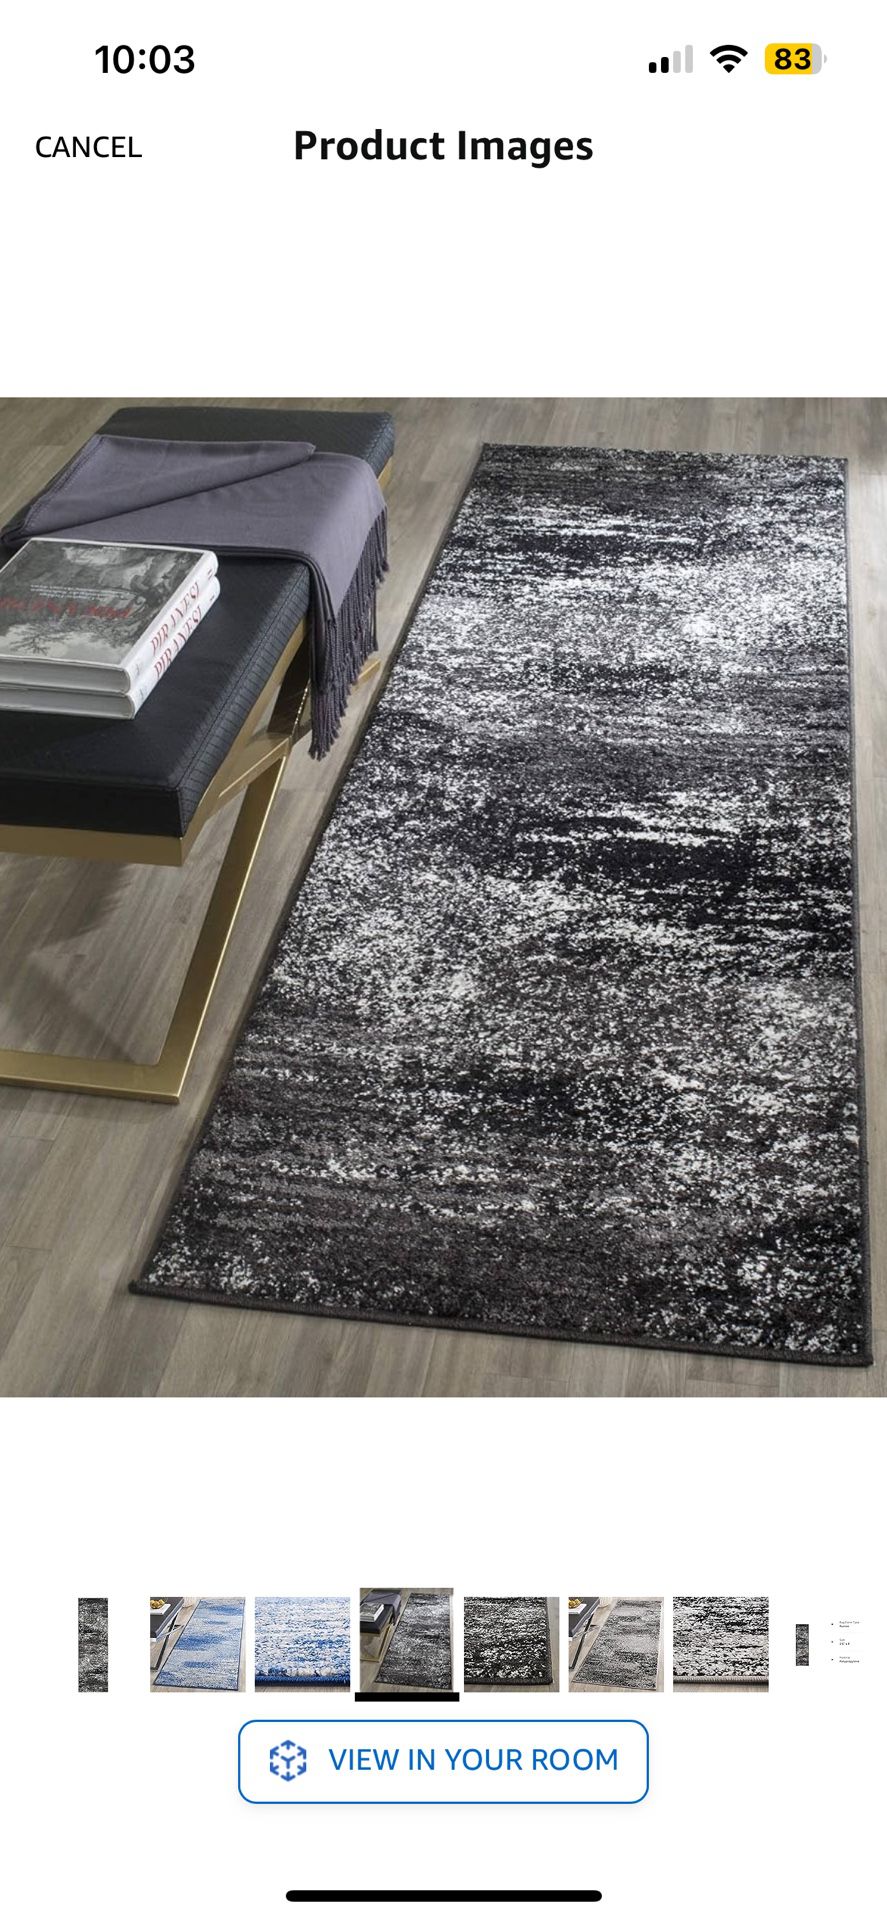 SAFAVIEH Adirondack Collection Runner Rug - 2'6" x 8', Silver & Black, Modern Abstract Design, Non-Shedding & Easy Care, Ideal for High Traffic Areas 